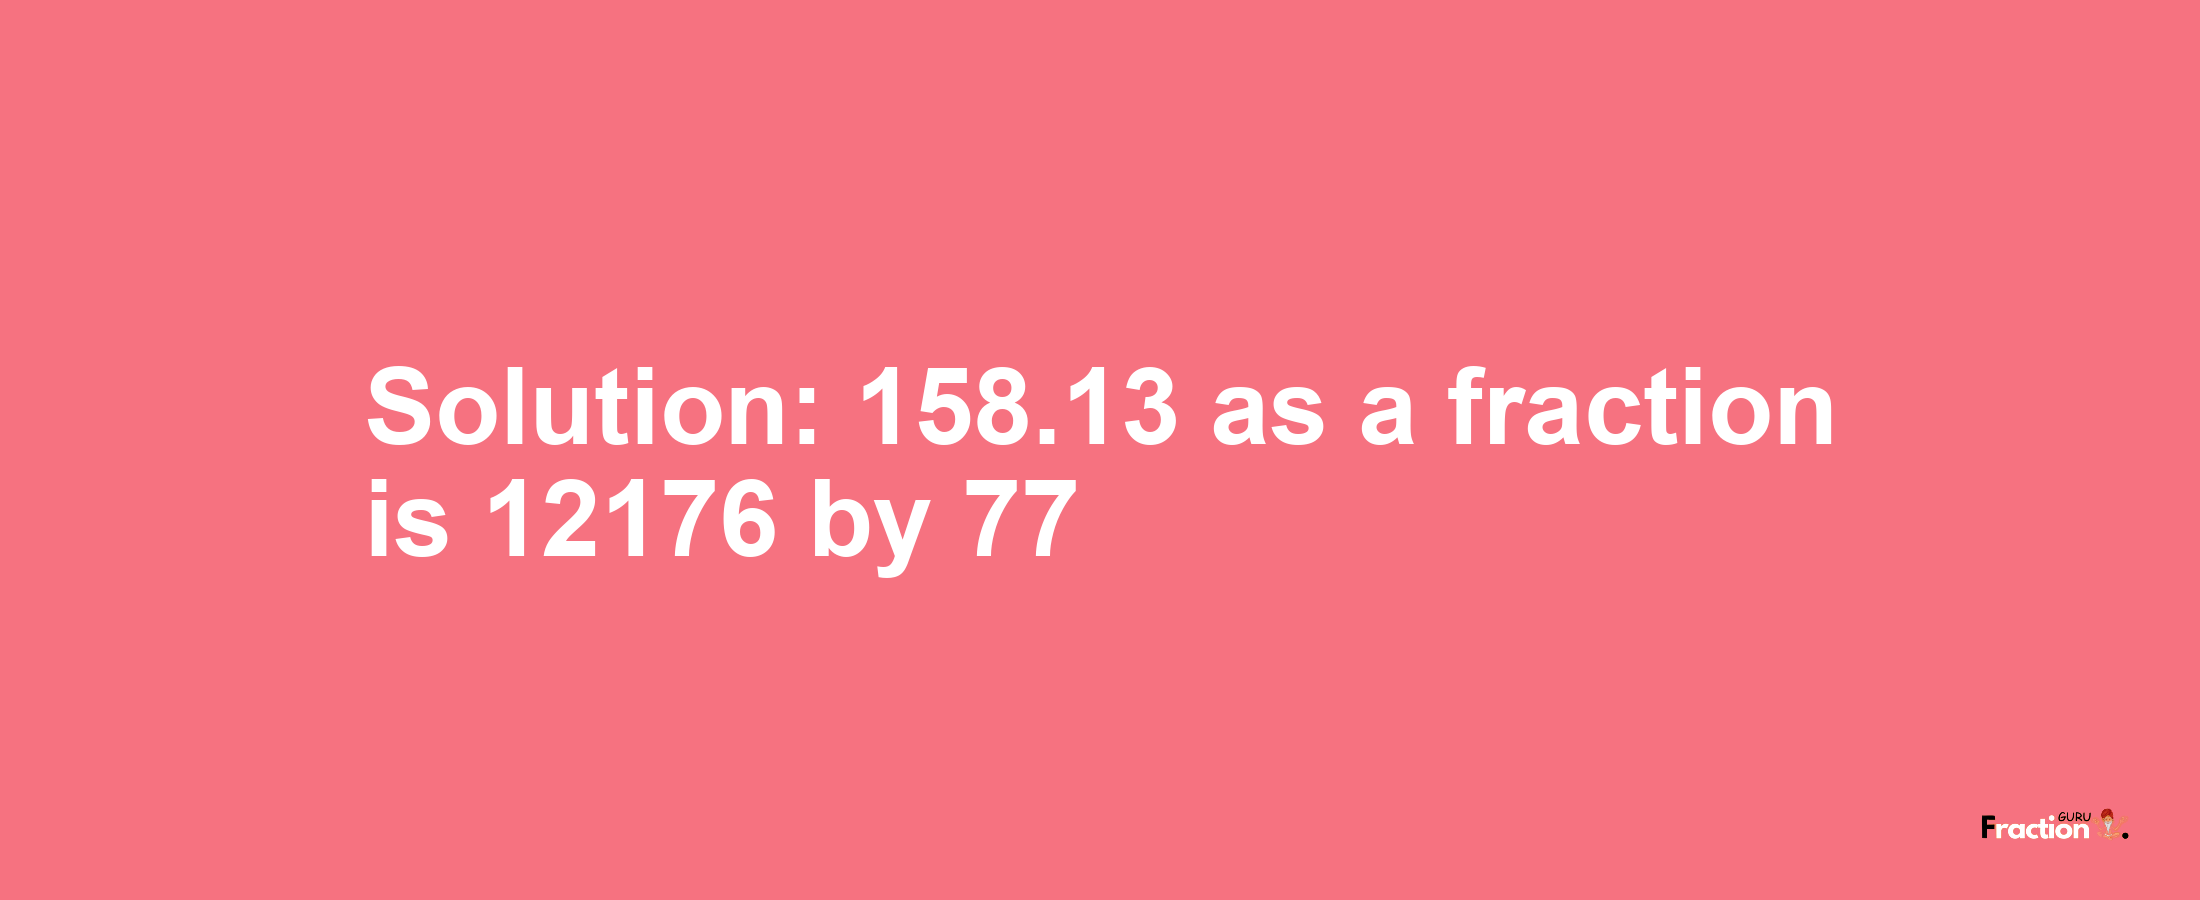 Solution:158.13 as a fraction is 12176/77